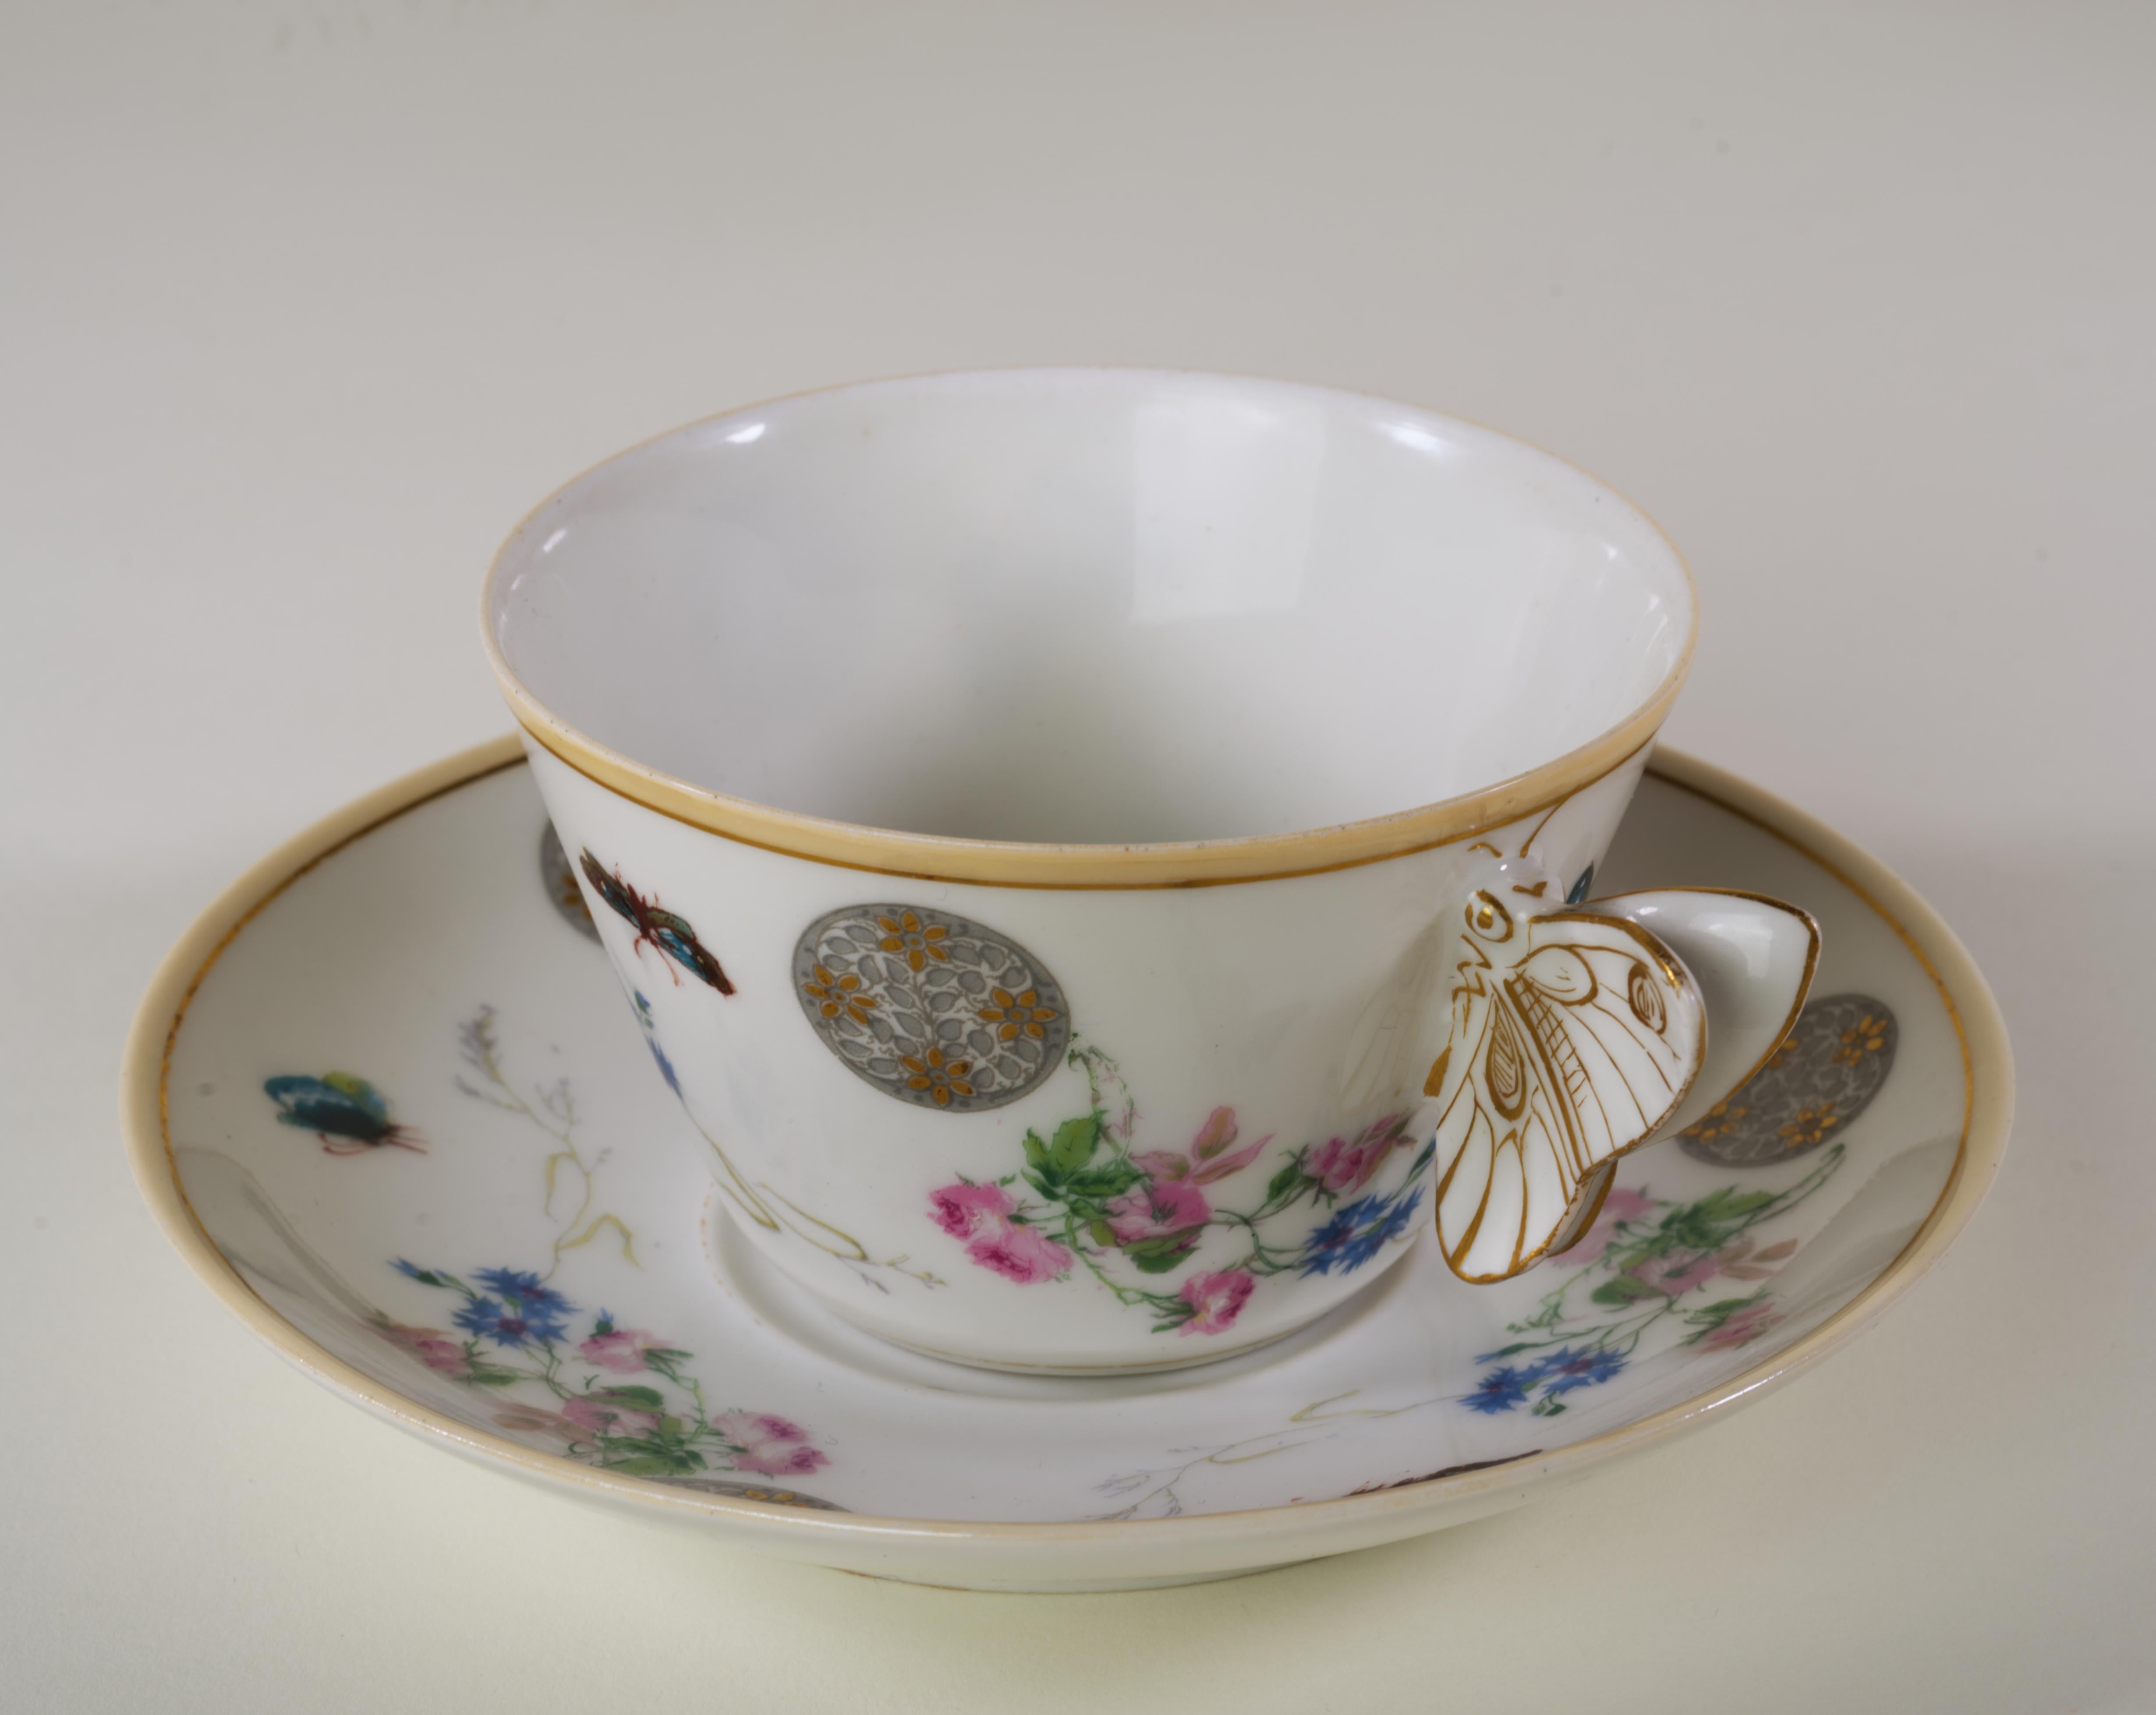 Porcelain Haviland Limoges Butterfly Handled Cup and saucer set, 1879-1889, Aesthetic  For Sale